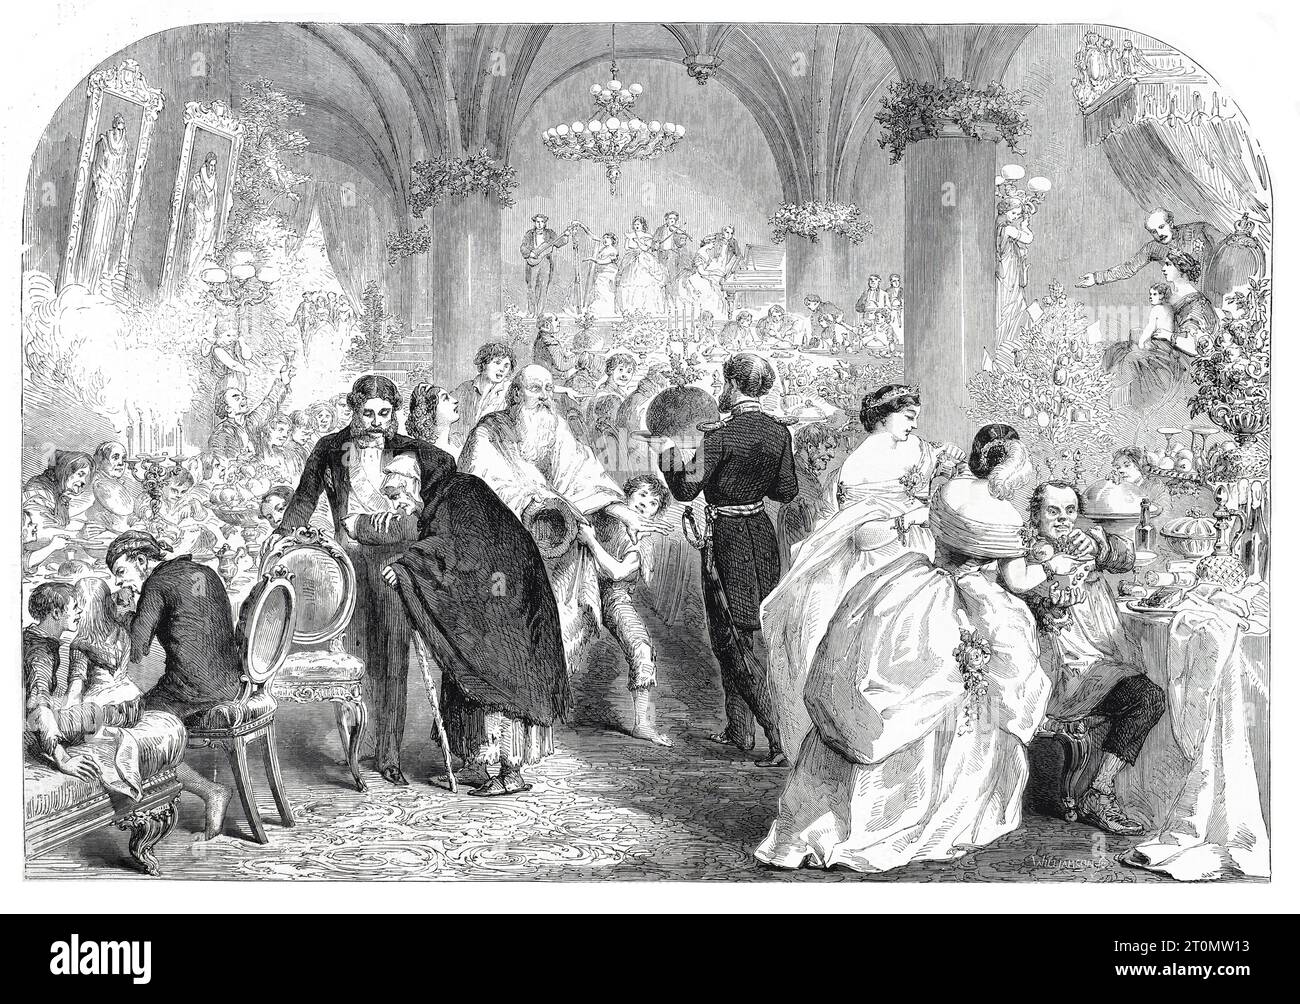 Noël utopique de Miss Florence Claxton. Black and White Illustration from the London Illustrated News ; 24 décembre 1859. Banque D'Images